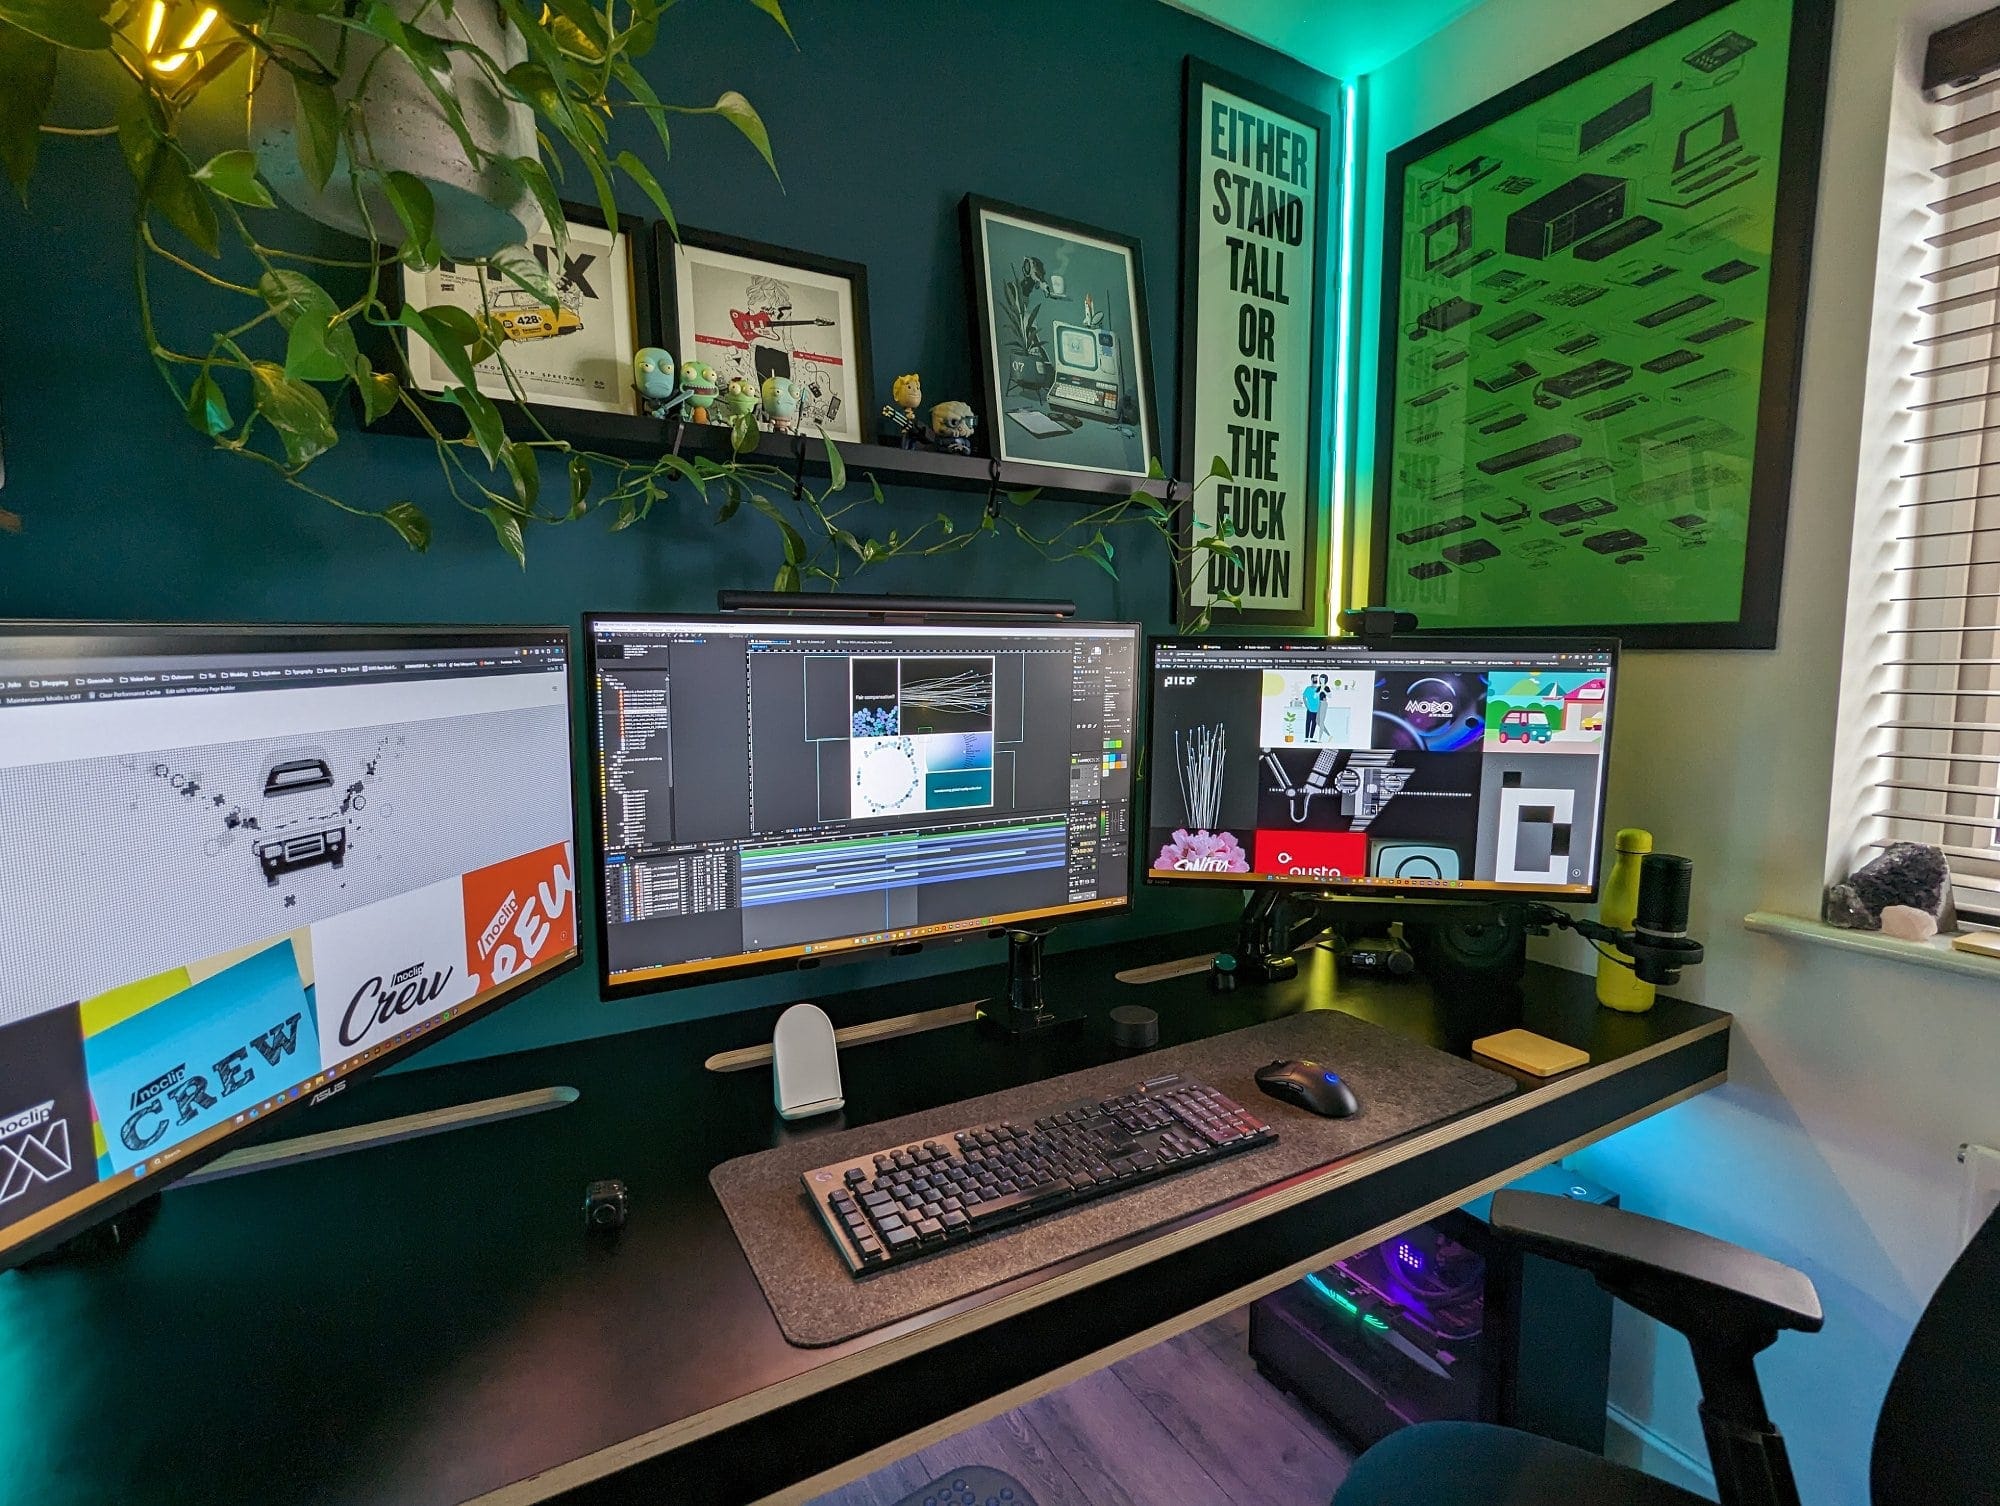 A modern home office workspace featuring a triple-monitor setup on a sleek desk, accented by vibrant green plants, framed art, motivational posters, and colourful LED lighting